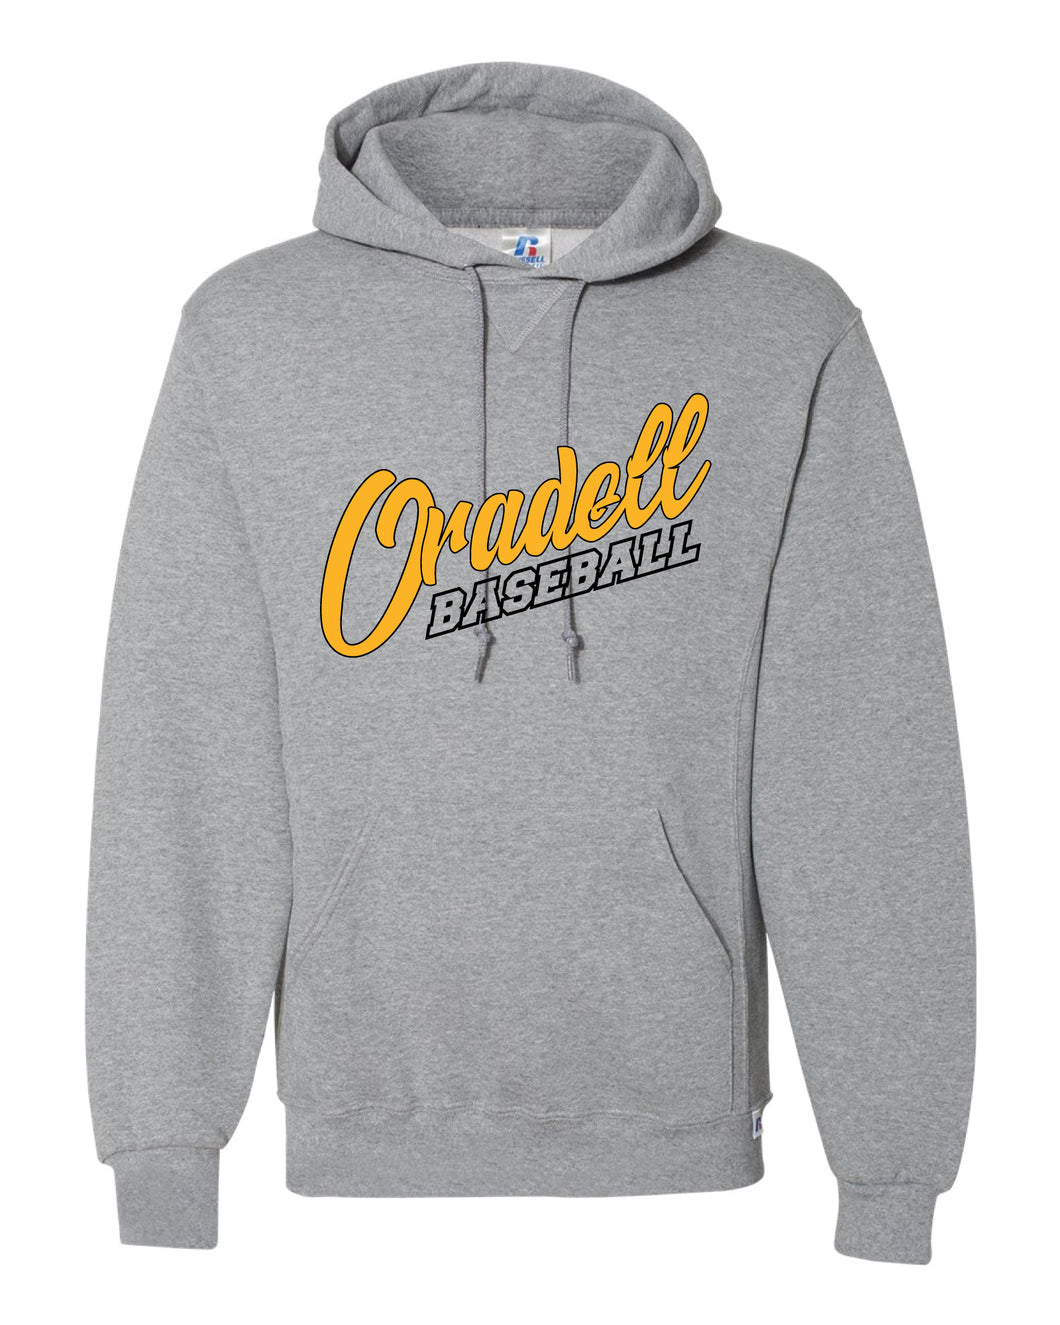 Oradell Baseball Russell Athletic Cotton Hoodie - Gray